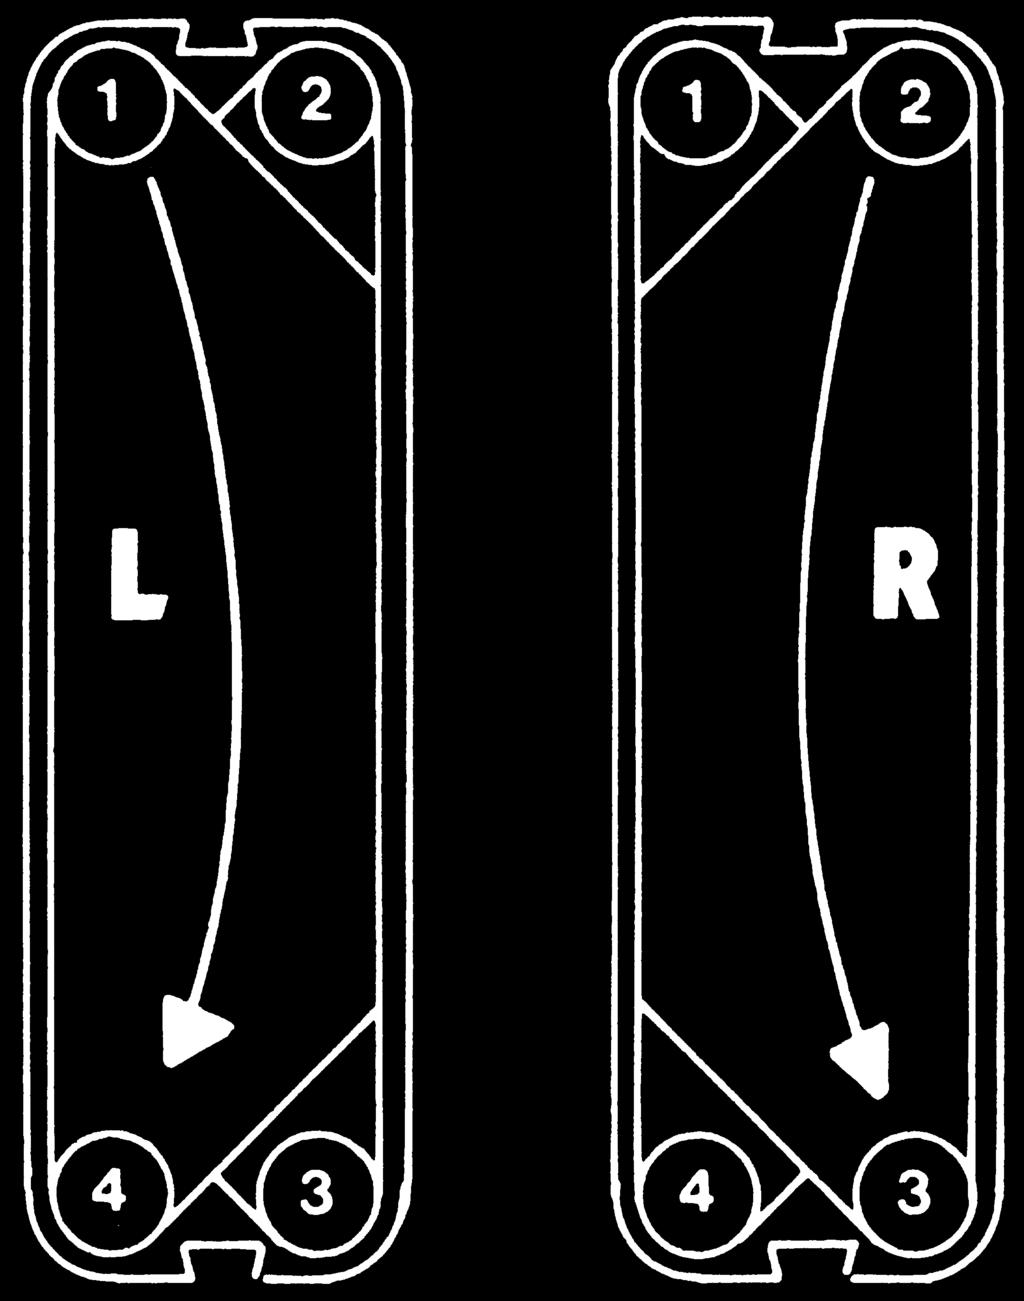 Here right and left plates are different ).